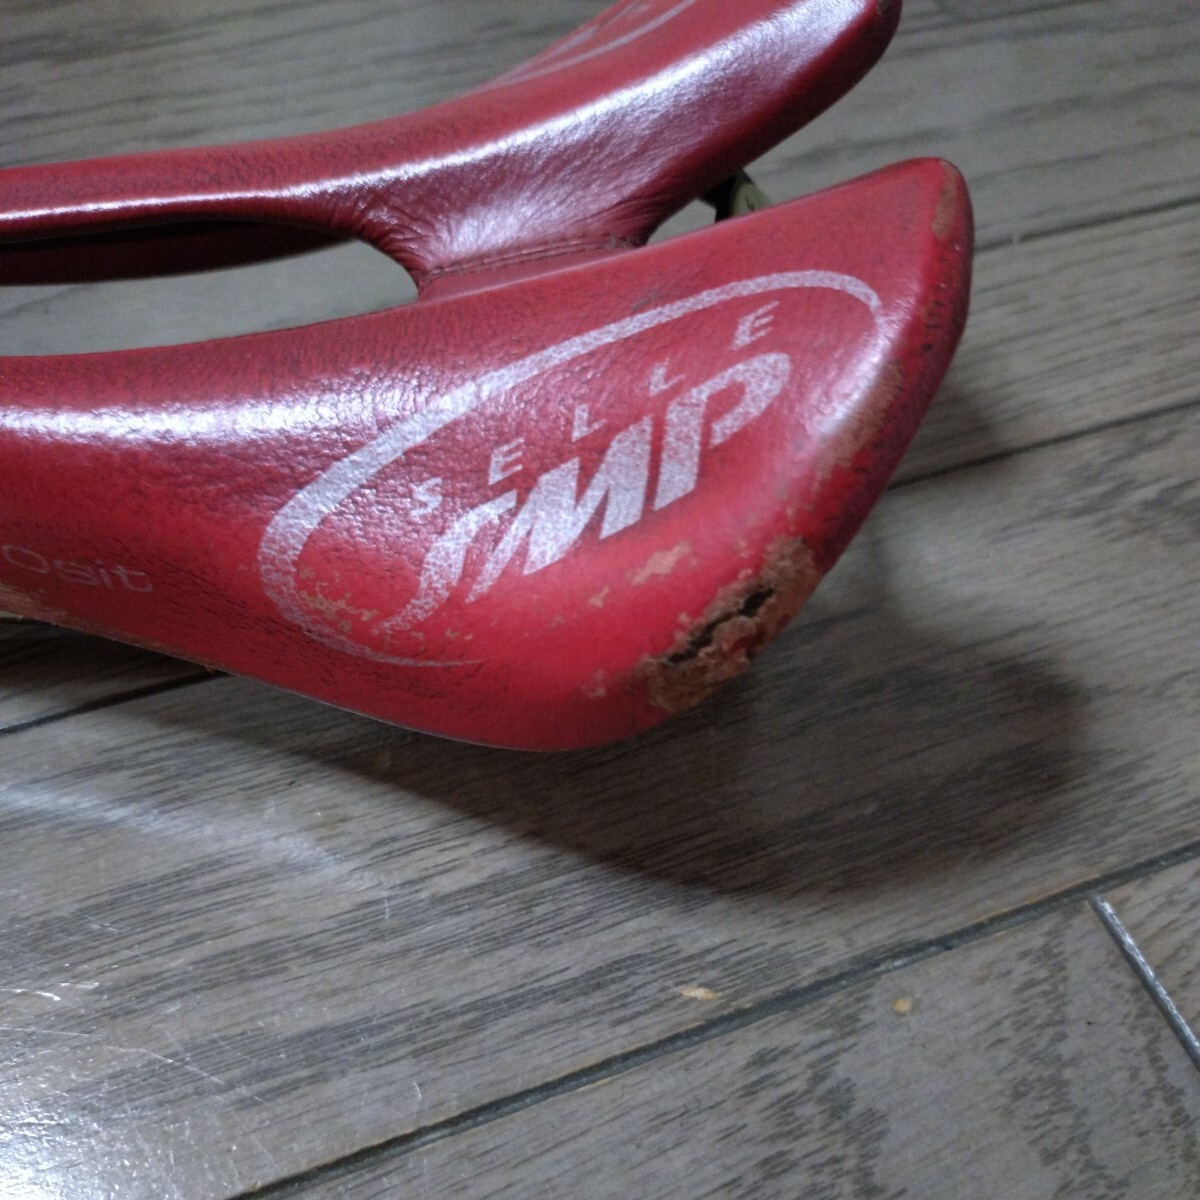 SELLE SMP COMPOSIT レッド 初期モデル_画像5